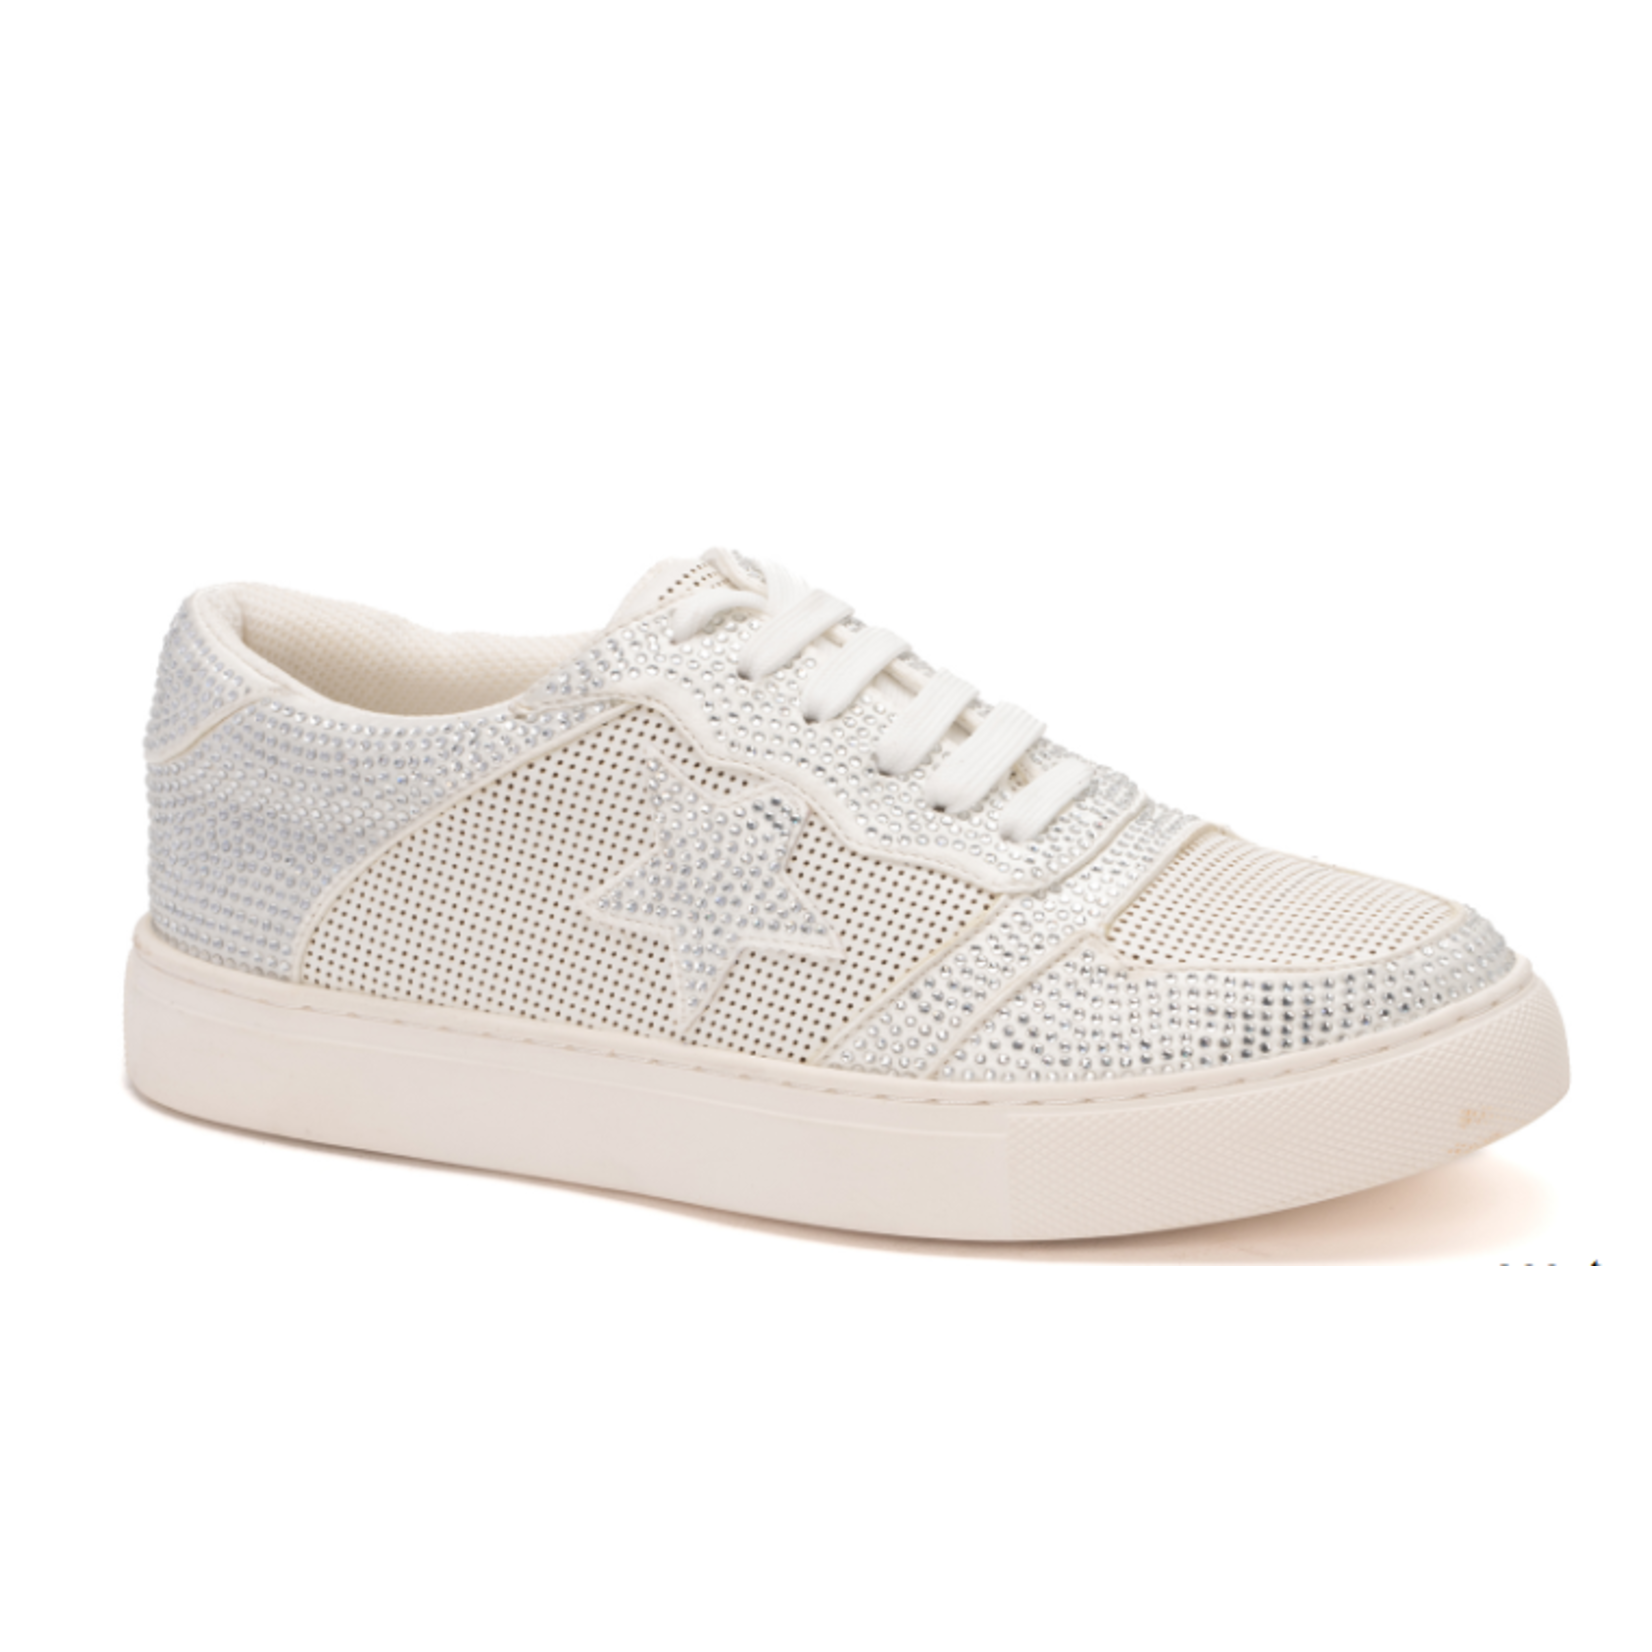 Corkys Corkys Legendary Sneakers White Crystals